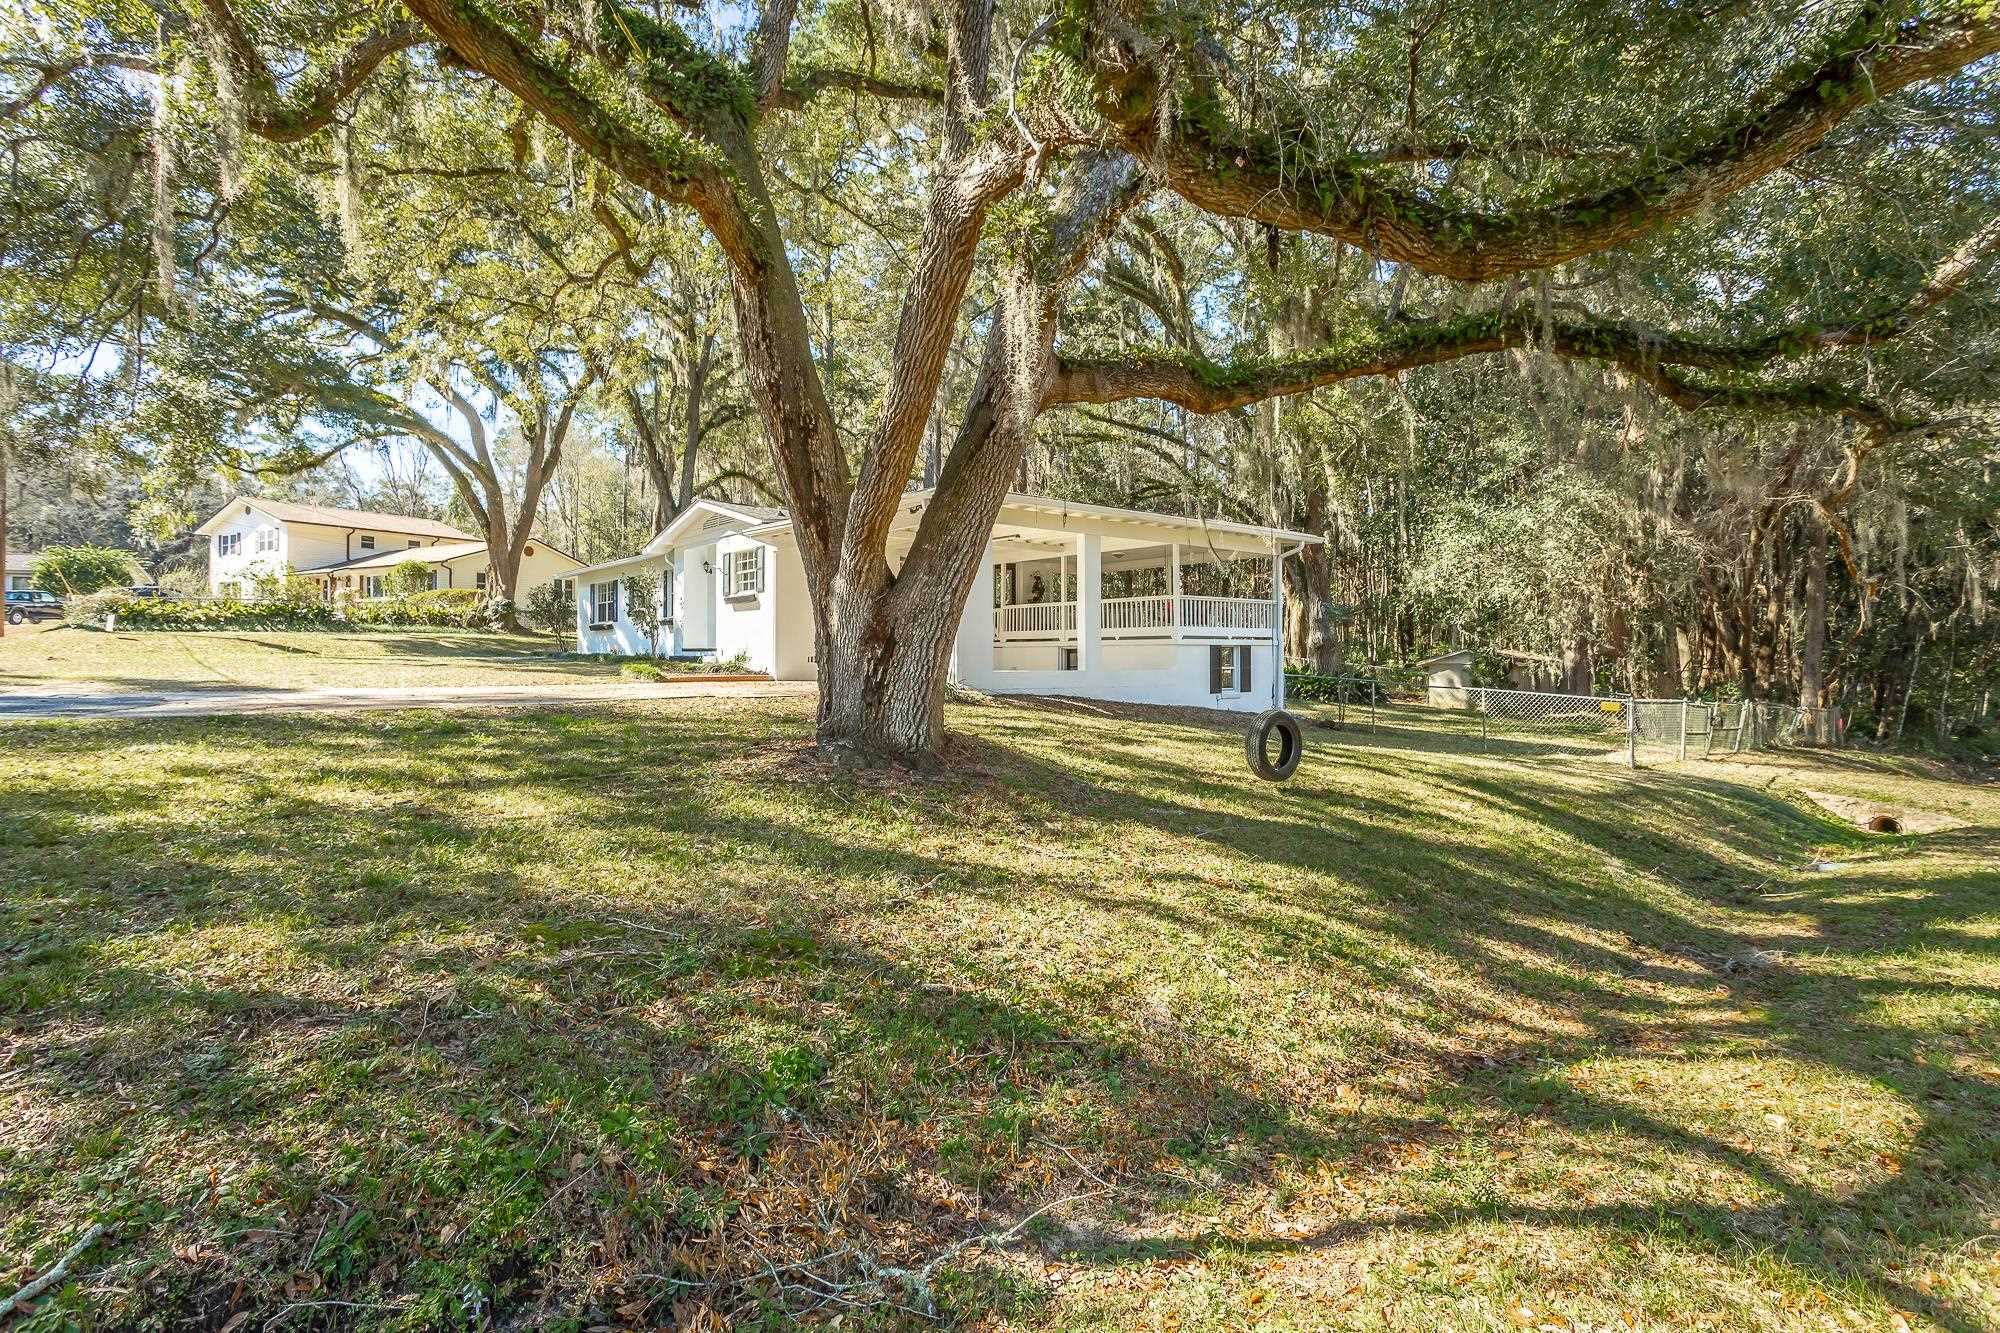 3120 Vause Drive,TALLAHASSEE,Florida 32303,3 Bedrooms Bedrooms,1 BathroomBathrooms,Detached single family,3120 Vause Drive,370291